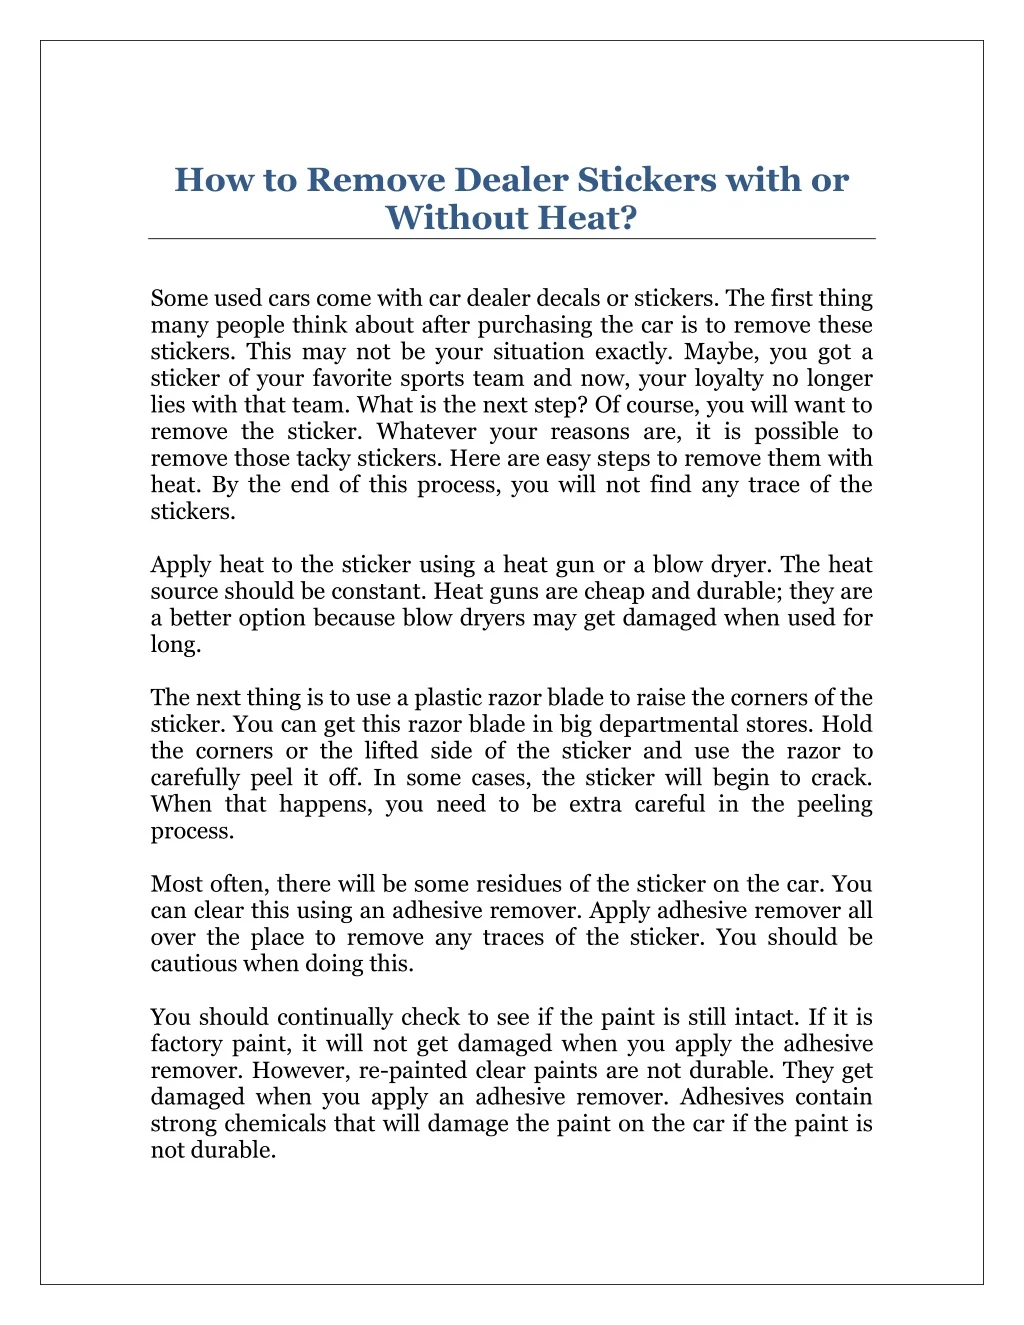 how to remove dealer stickers with or without heat